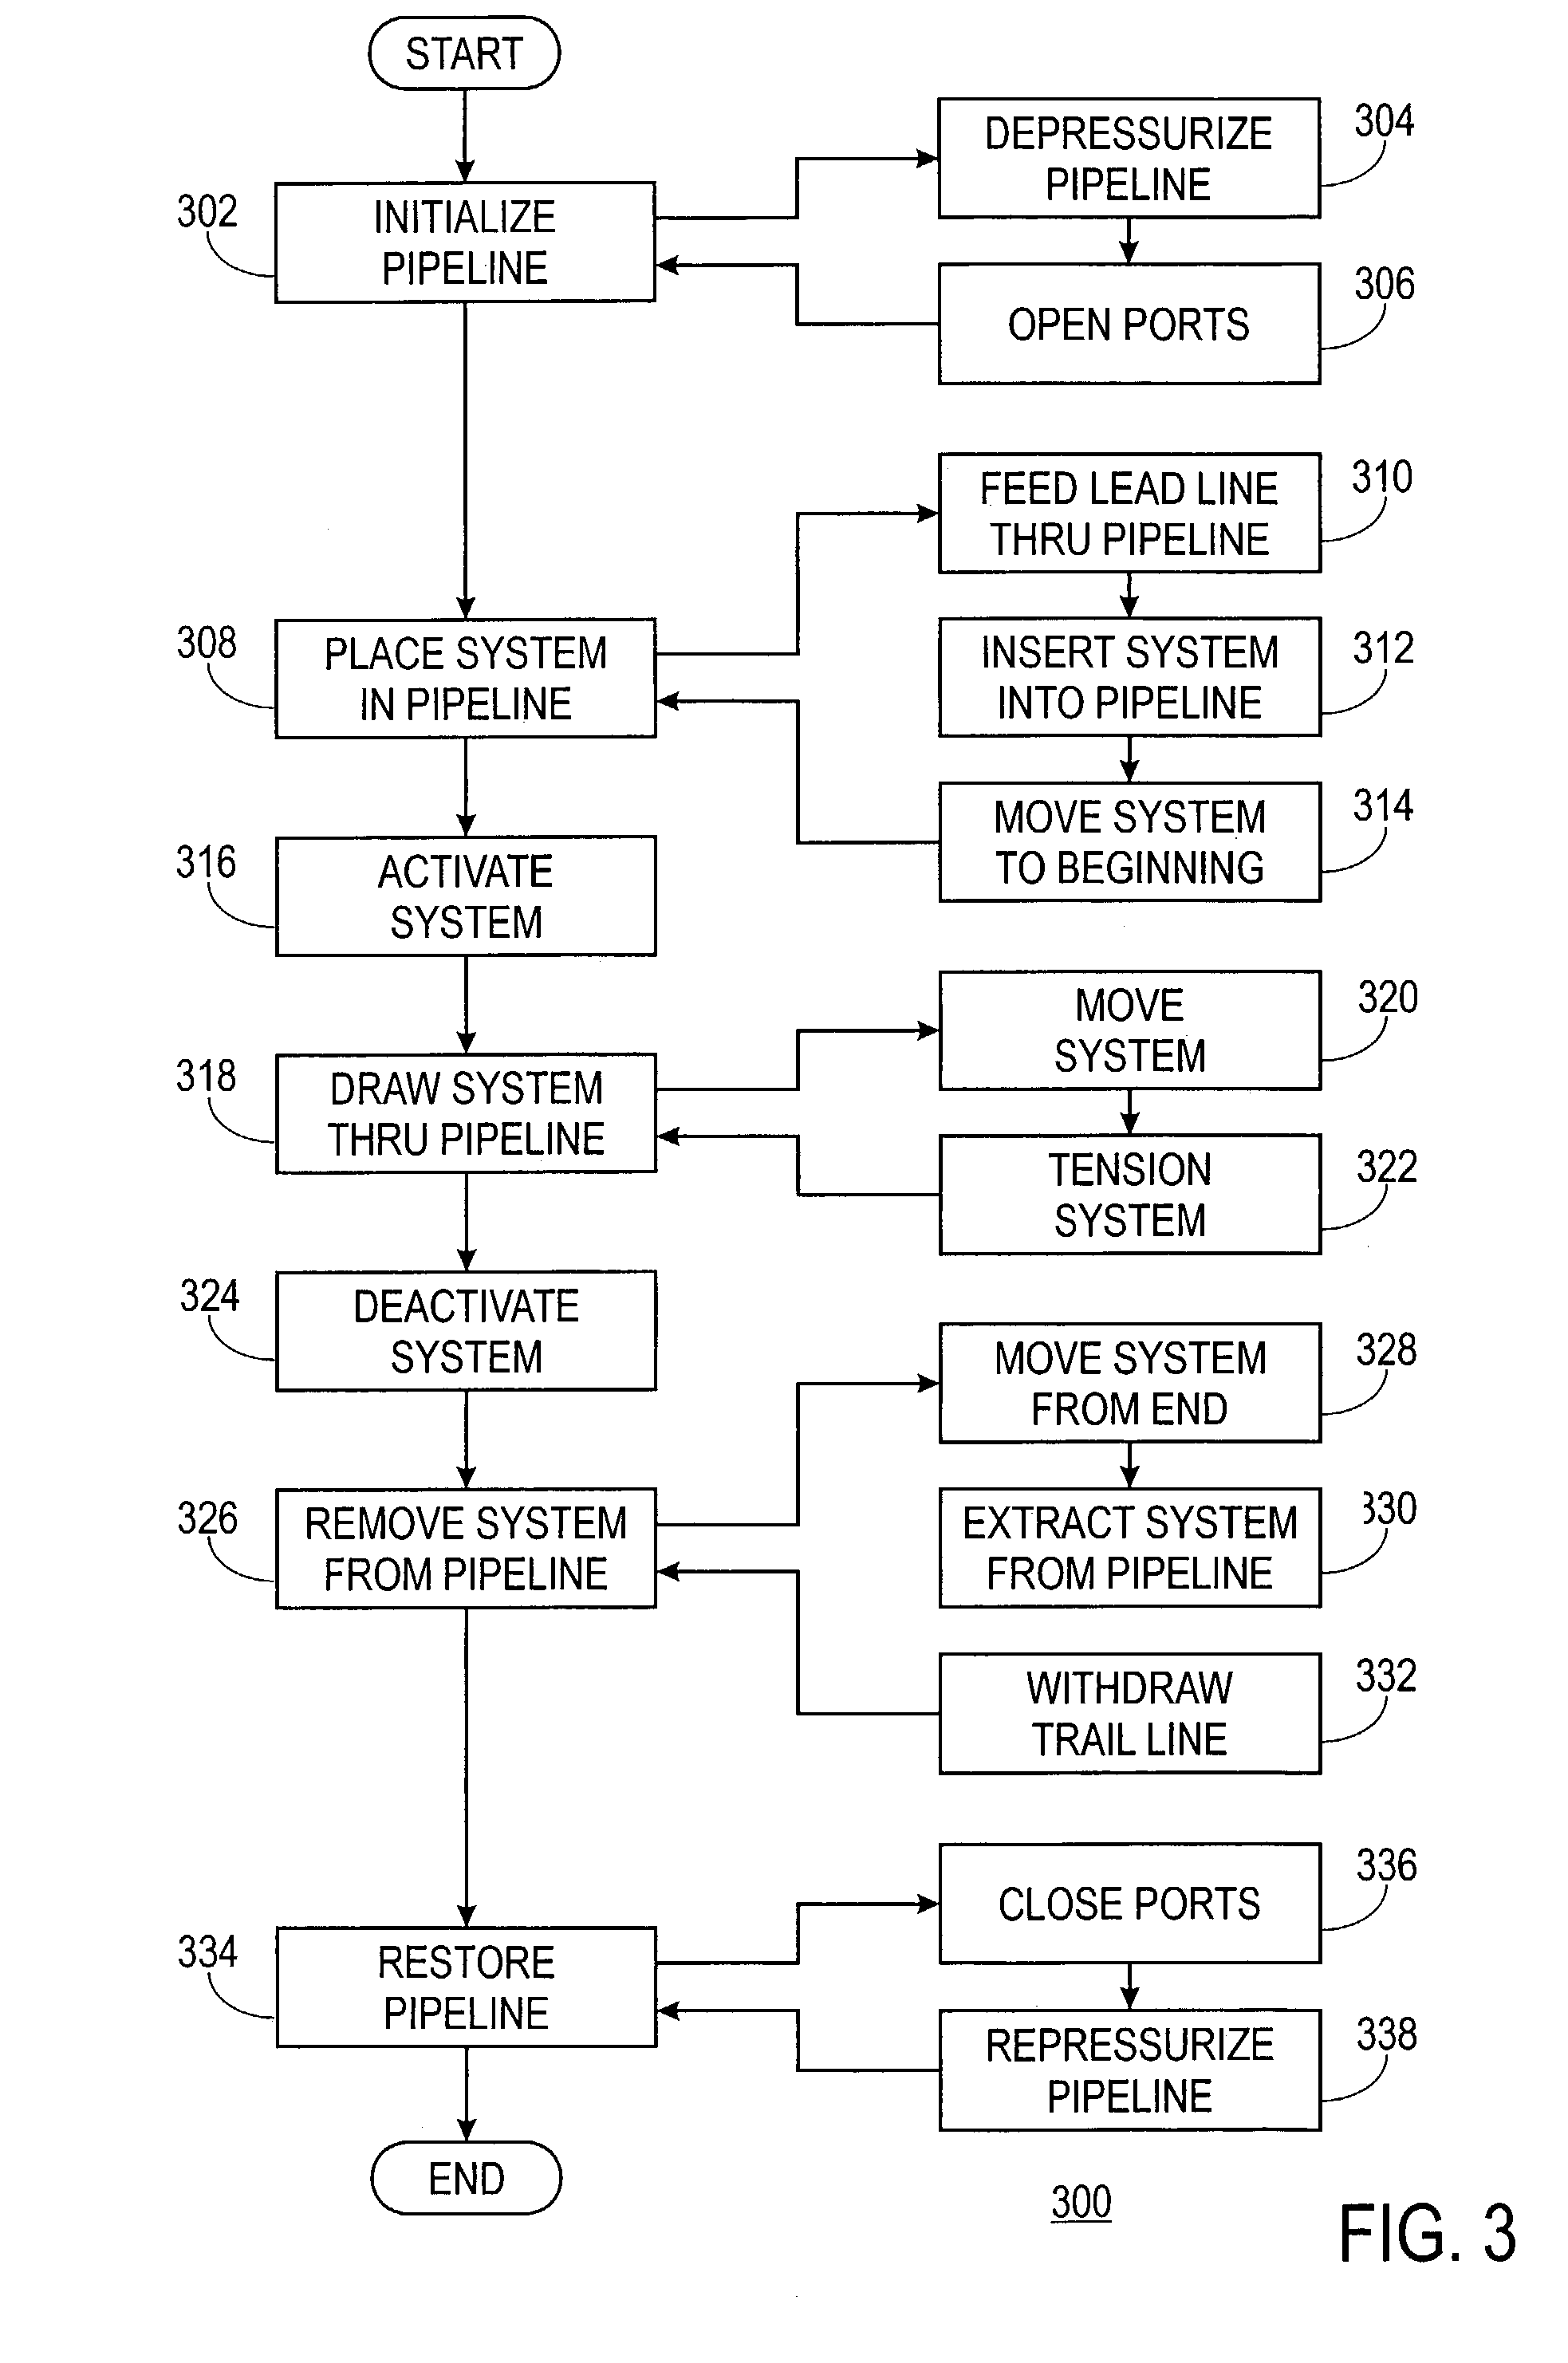 Pipe-inspection system